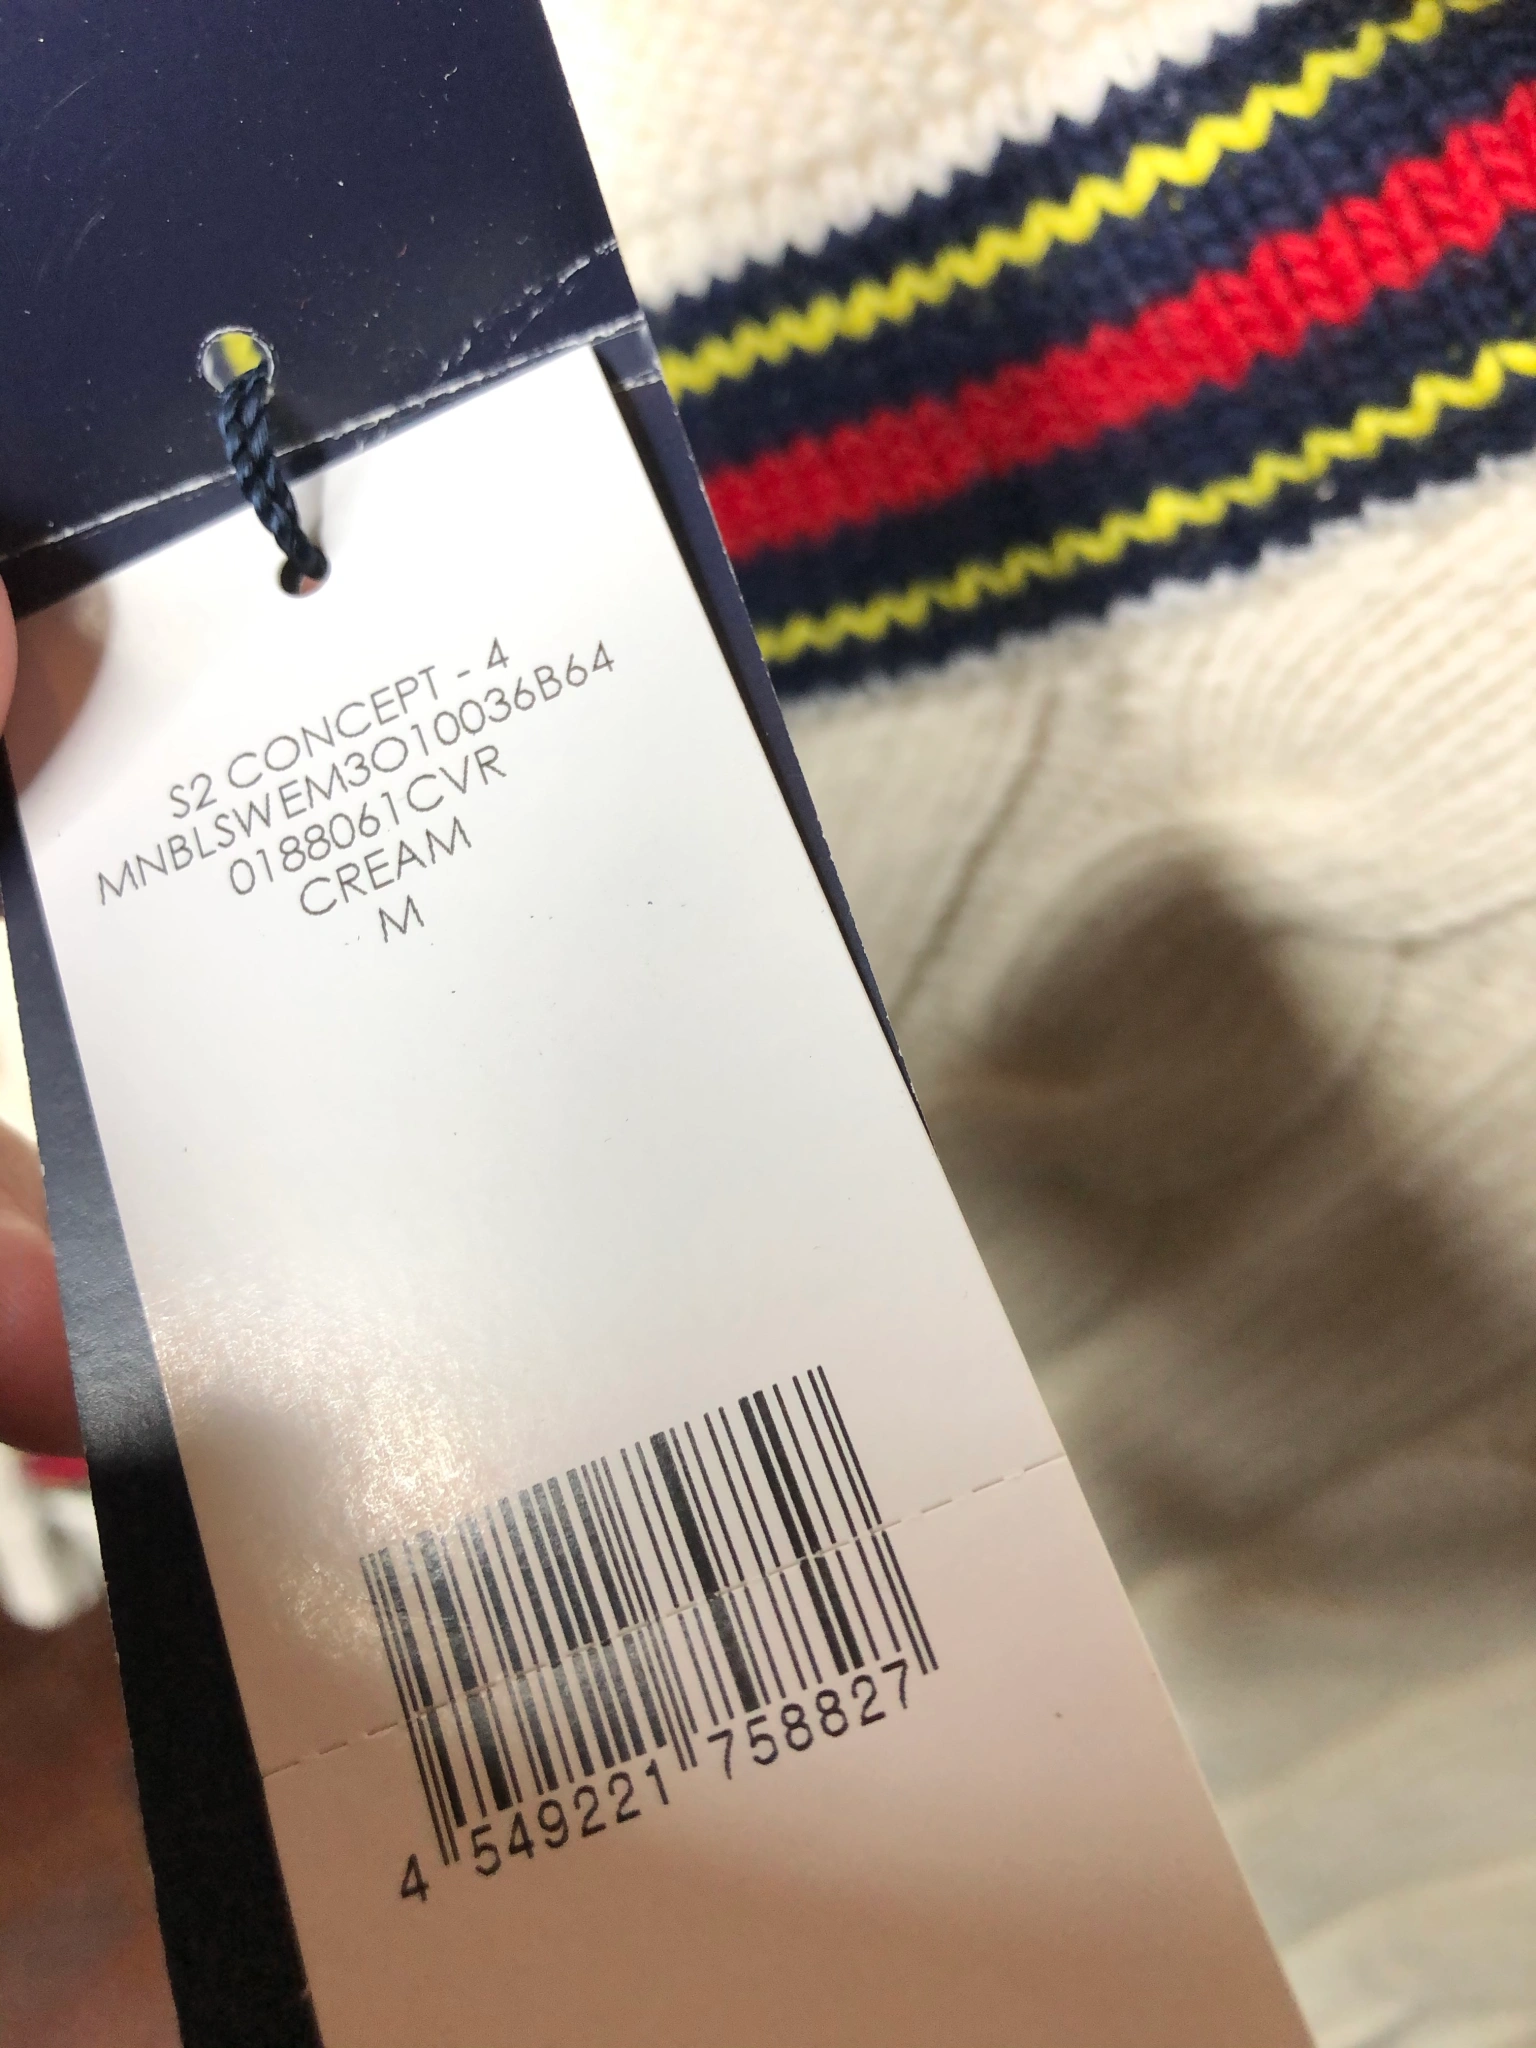 Authentication Guide: How to authenticate Polo Ralph Lauren garments ...